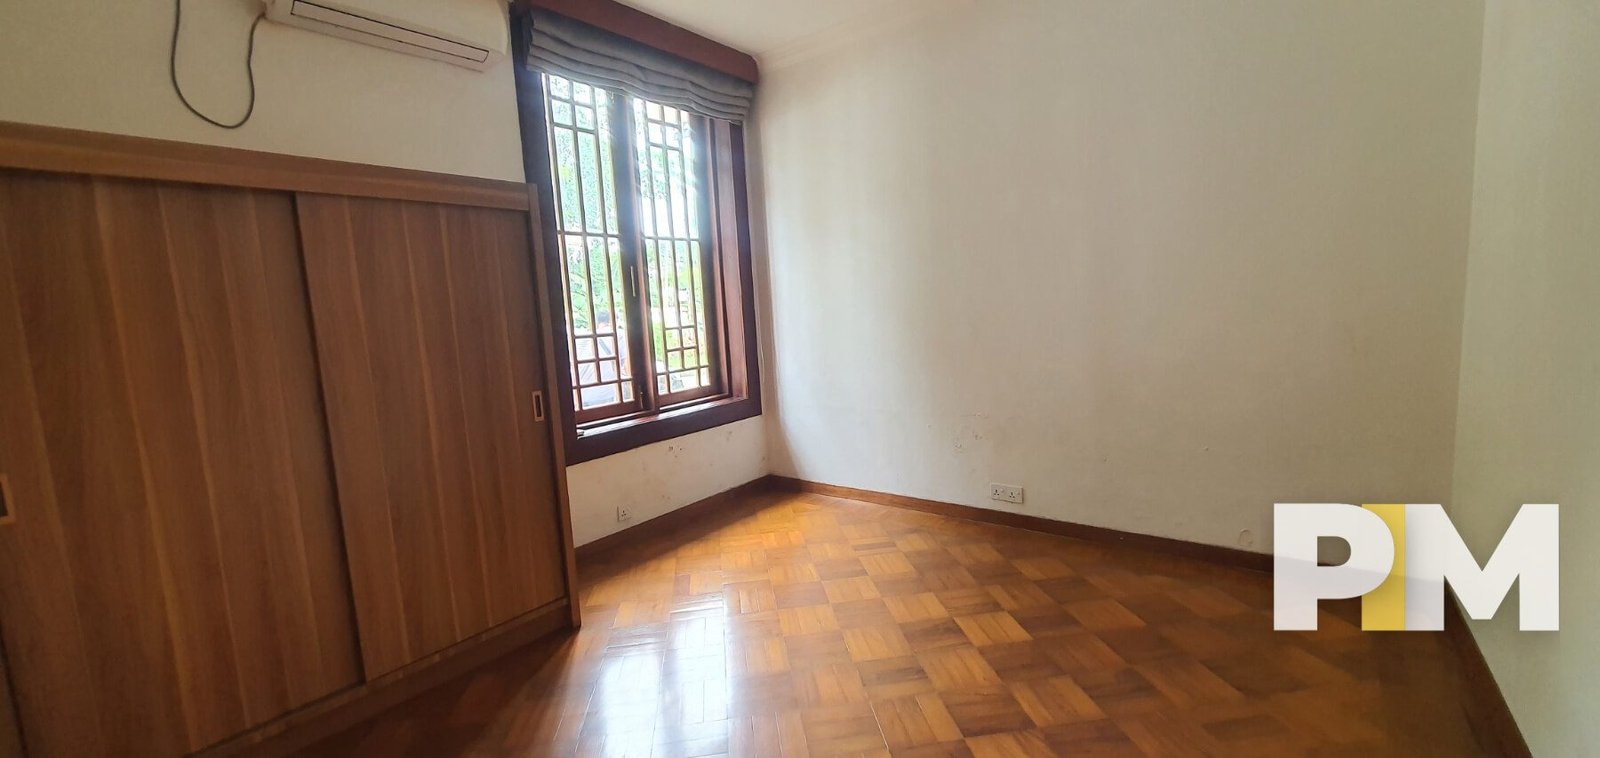 Room with window - Real Estate in Yangon